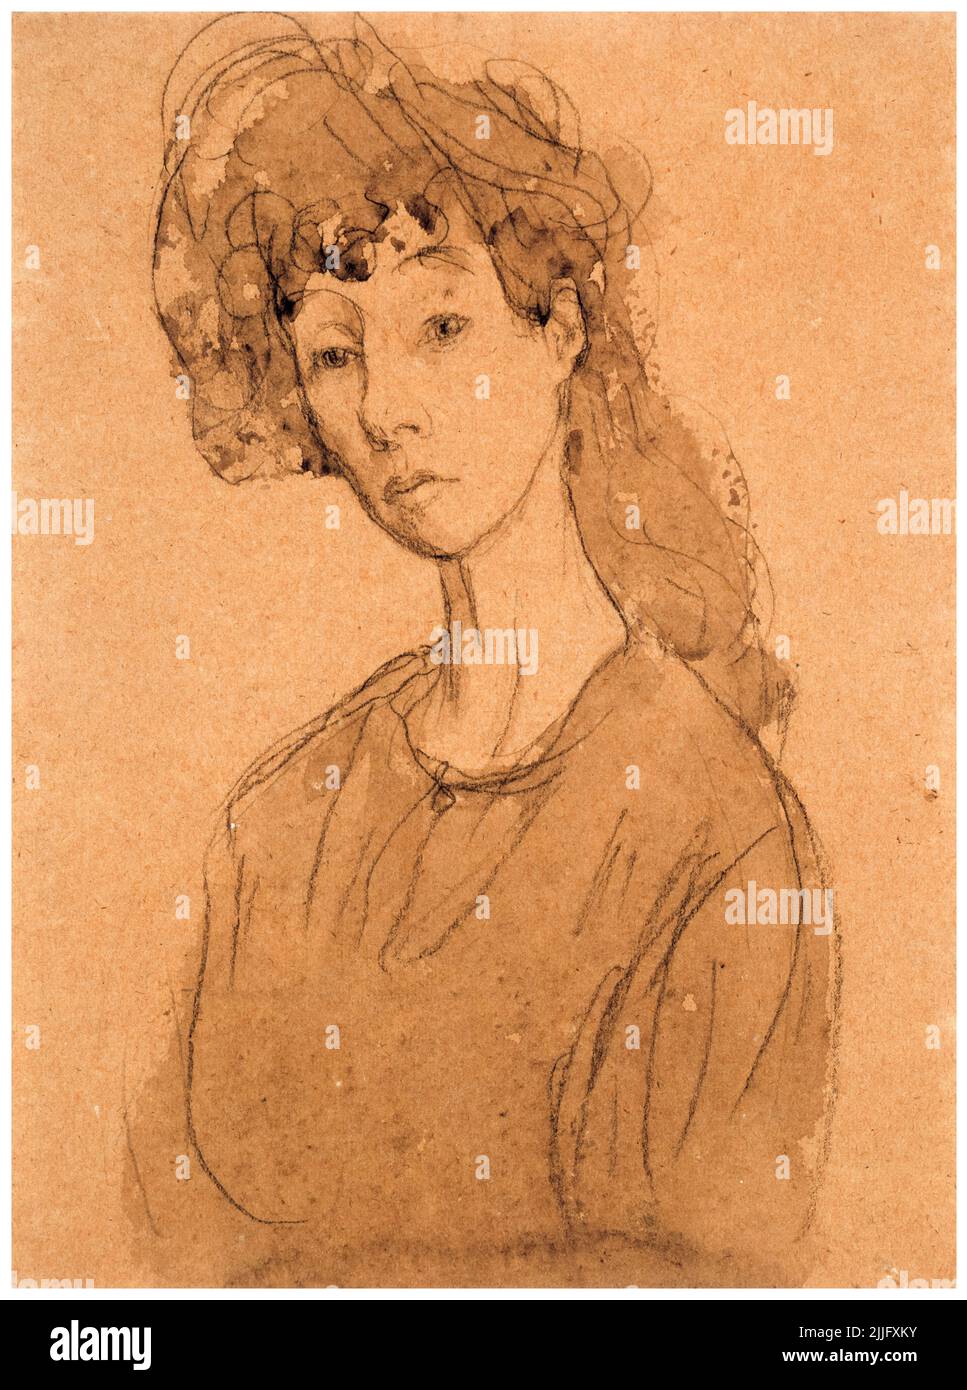 Gwen John, Bust of Woman (Study of Chloë Boughton-Leigh), portrait drawing in pencil and wash on paper, circa 1910 Stock Photo